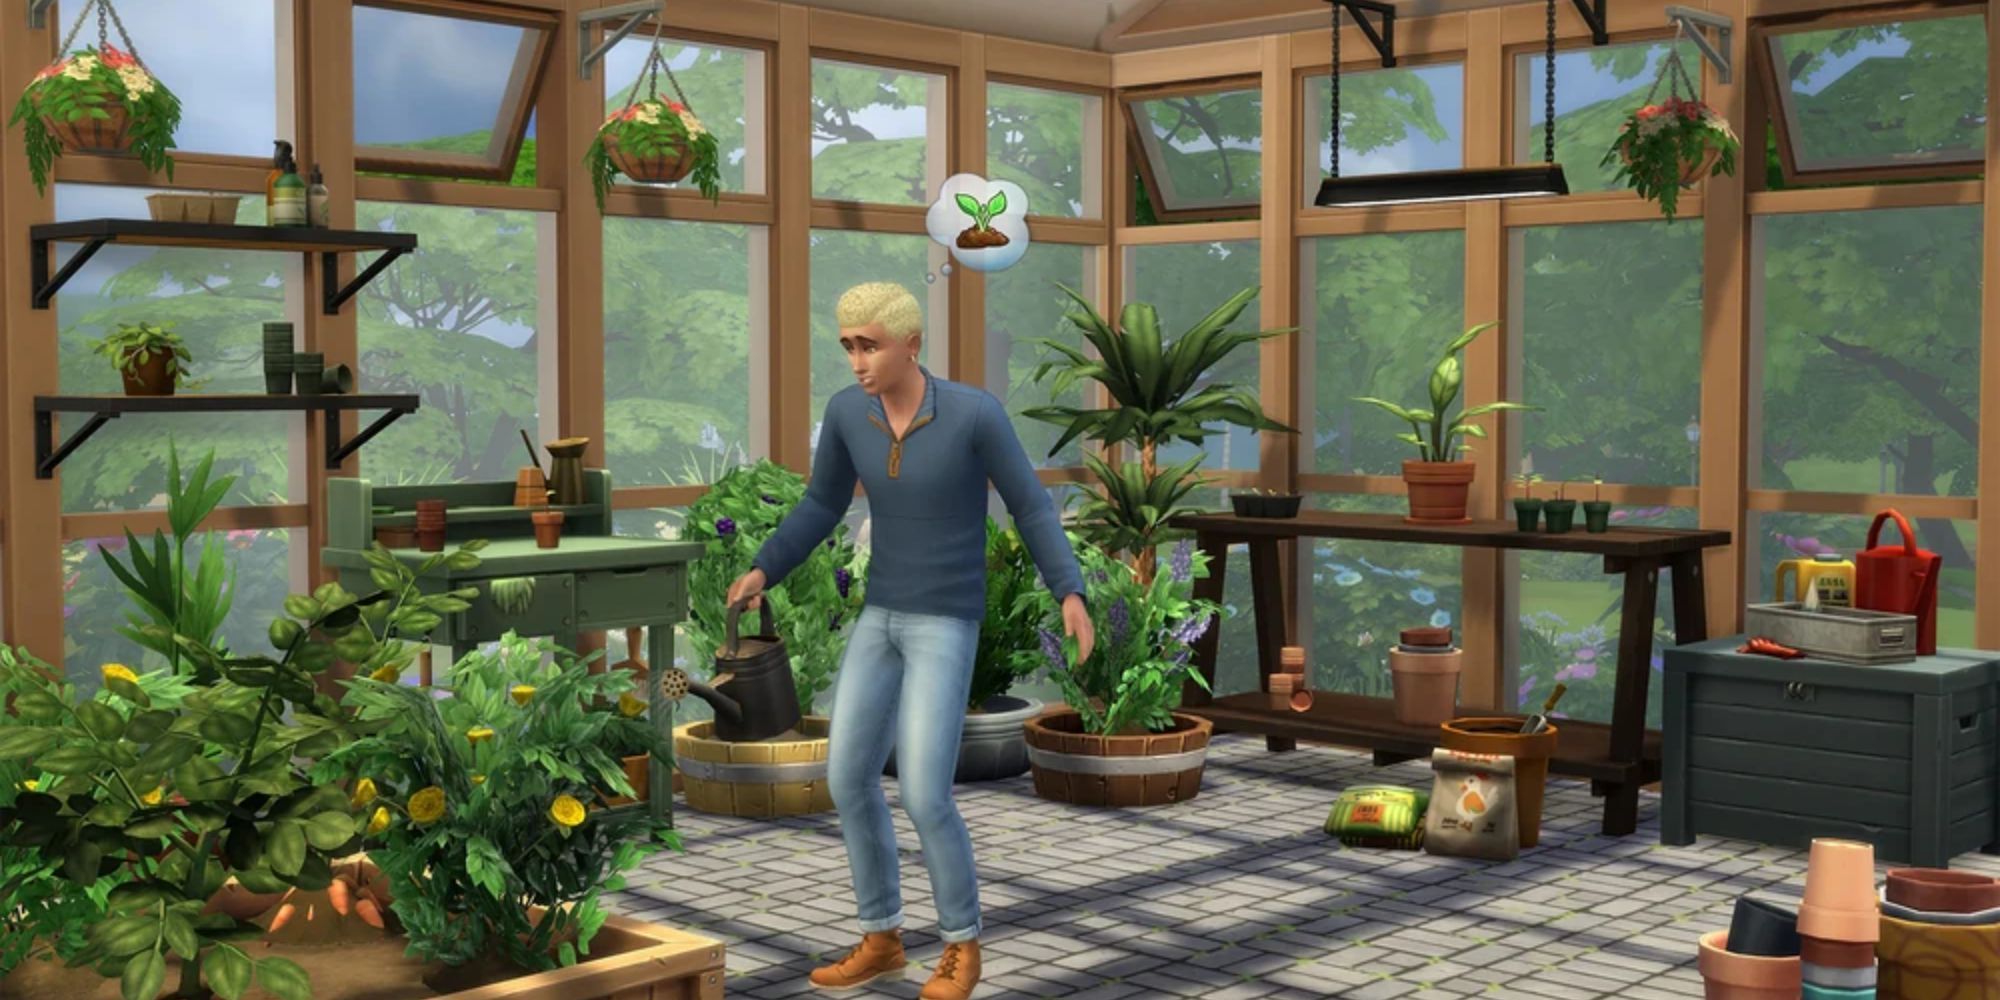 Sims 4 Greenhouse Haven Kit: A man looking overwhelmed in the middle of a greenhouse